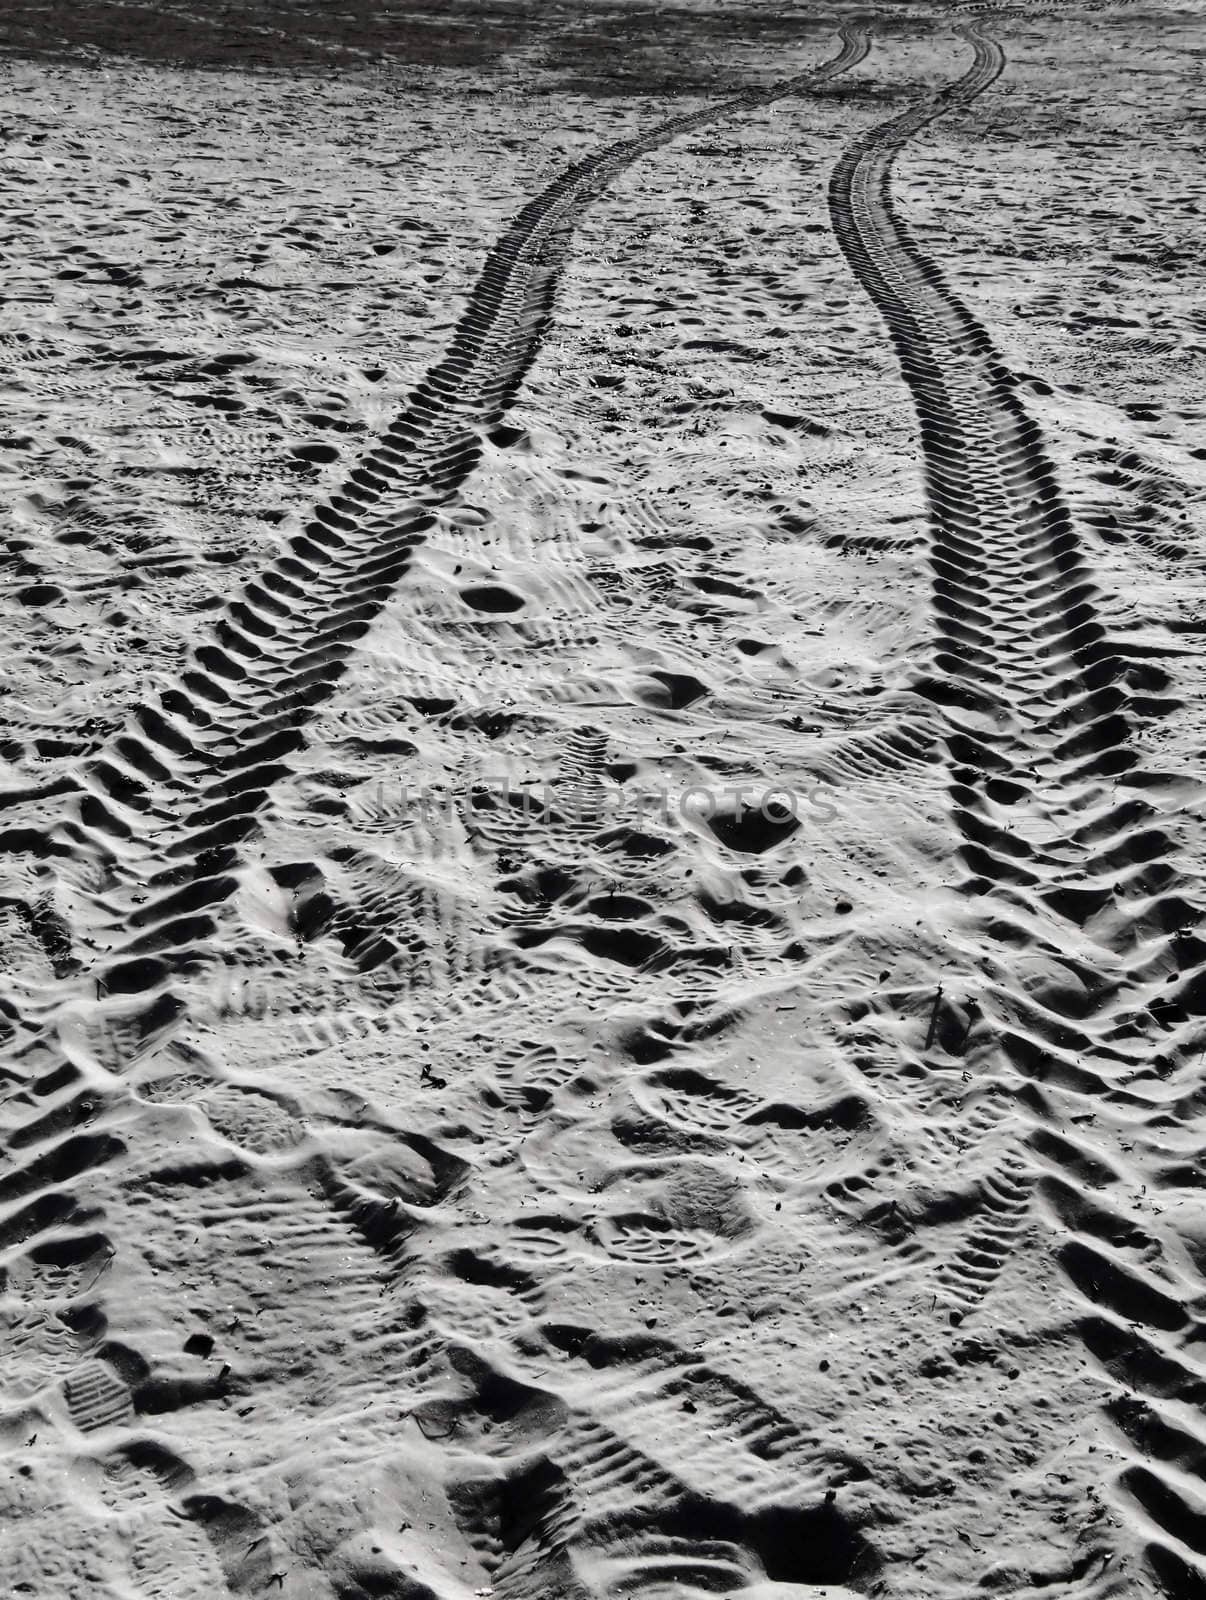 Tyre tracks imprinted in the Sahara desert sands - resemblance to lunar rover tracks